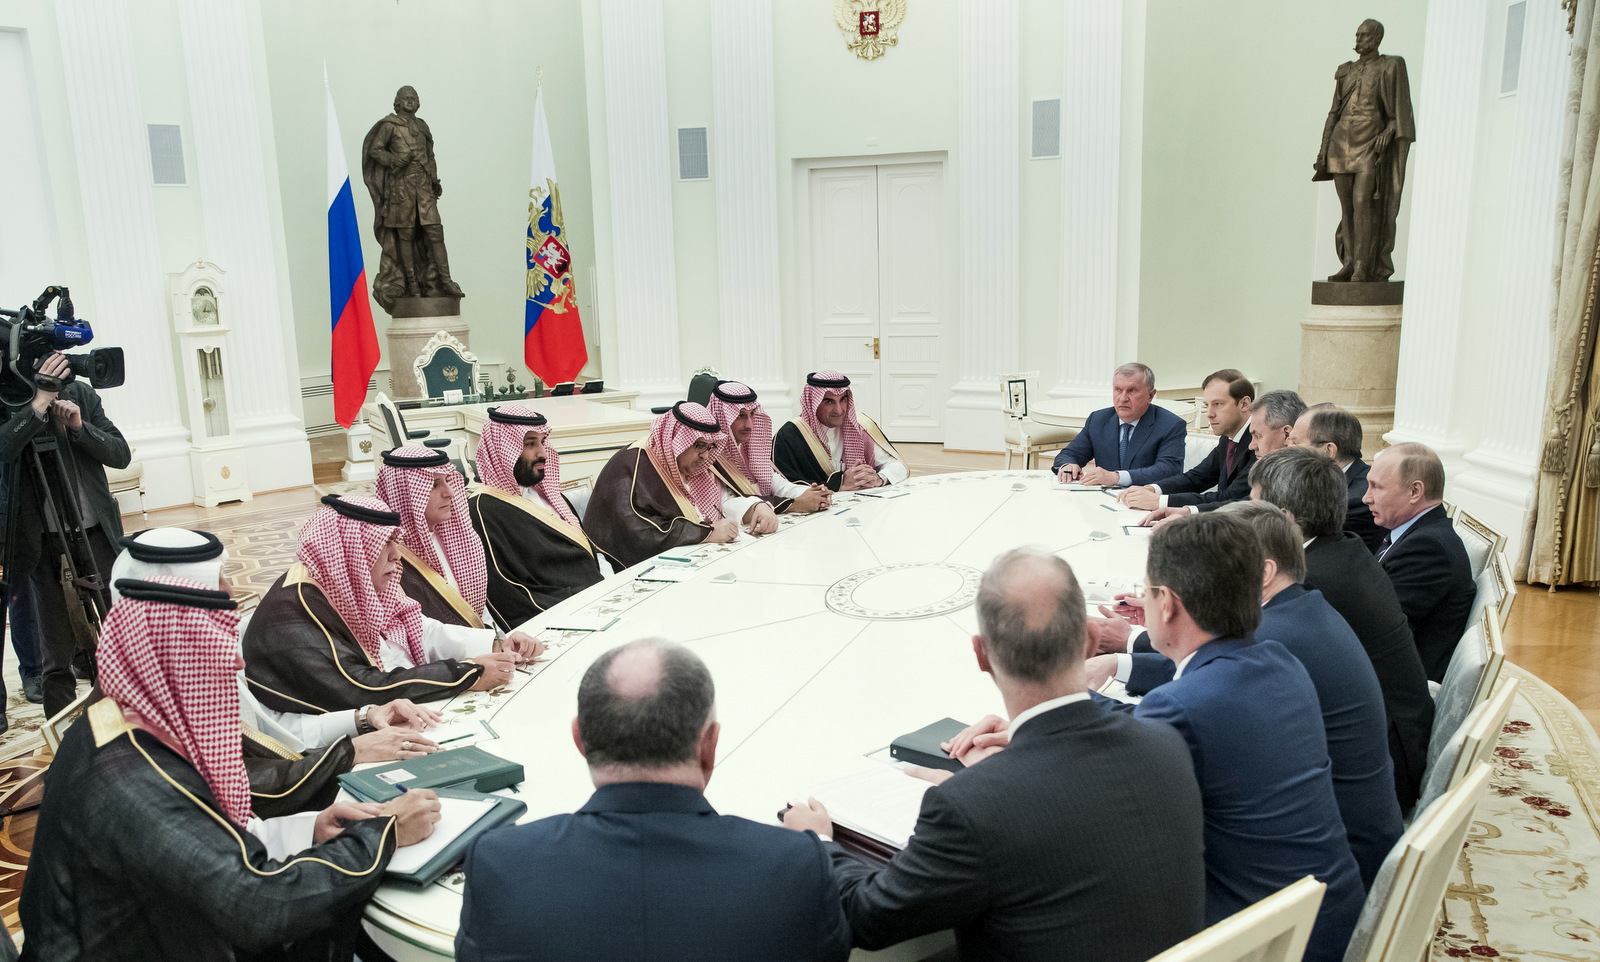 Russian President Vladimir Putin, right, meets with Saudi Deputy Crown Prince and Defense Minister Mohammed bin Salman, fifth left, in Moscow's Kremlin, Russia, Tuesday, May 30, 2017. (AP/Pavel Golovkin)